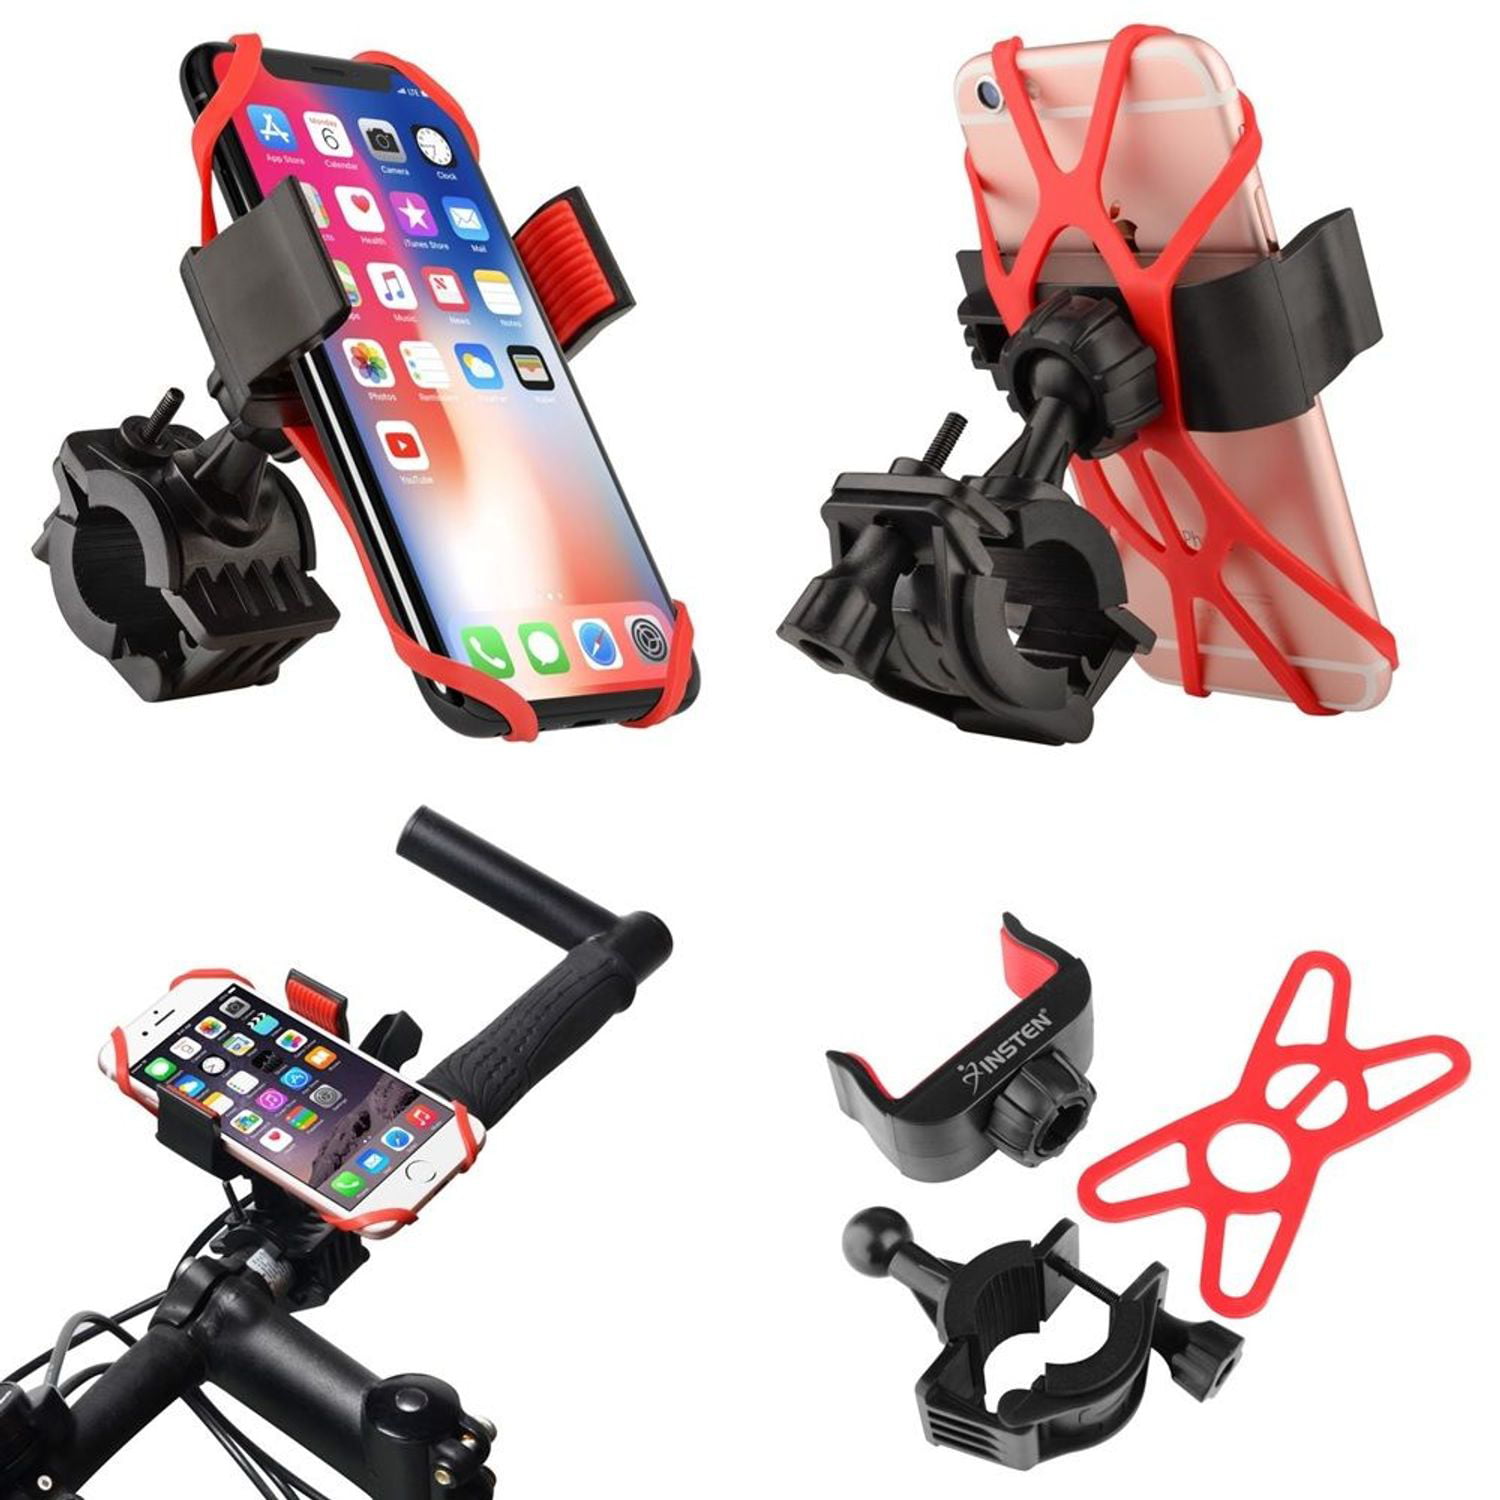 Anti-Shake 360° Rotation Bike Phone Holder Phone Mount for Bike 2020 Mechanical Safety Locking System Anwas Bike Phone Mount, Fit for iPhone 11 Pro Max XS XR X 8 7 Plus and All Android Phone 